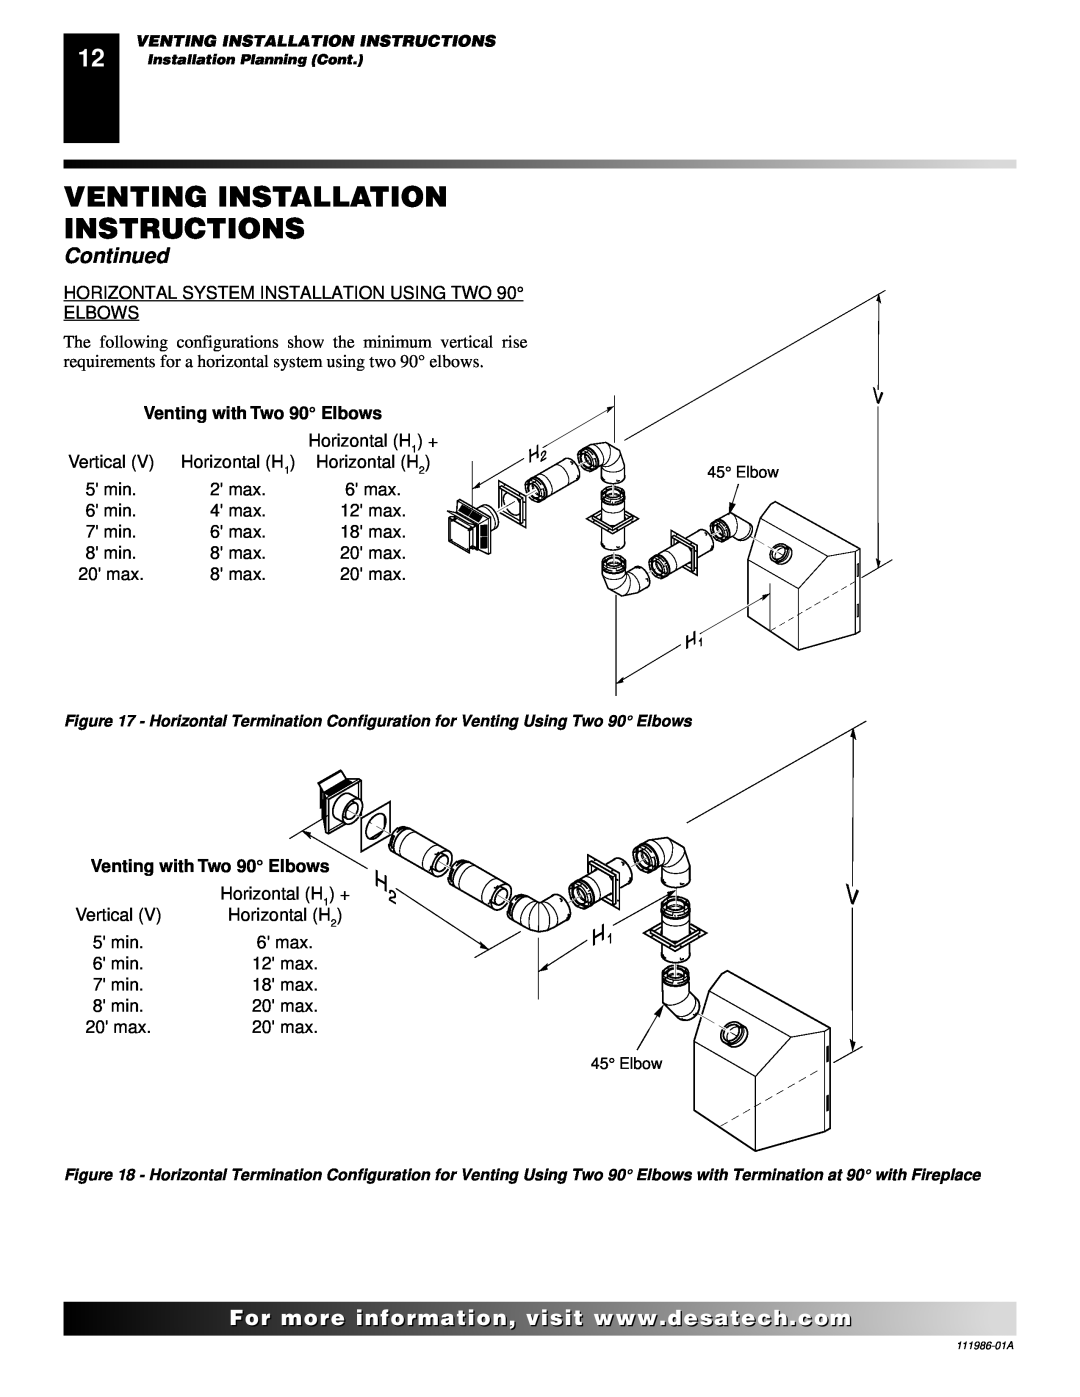 Desa T32P, T32N installation manual Venting with Two 90 Elbows, Venting Installation Instructions, Continued, For..com 